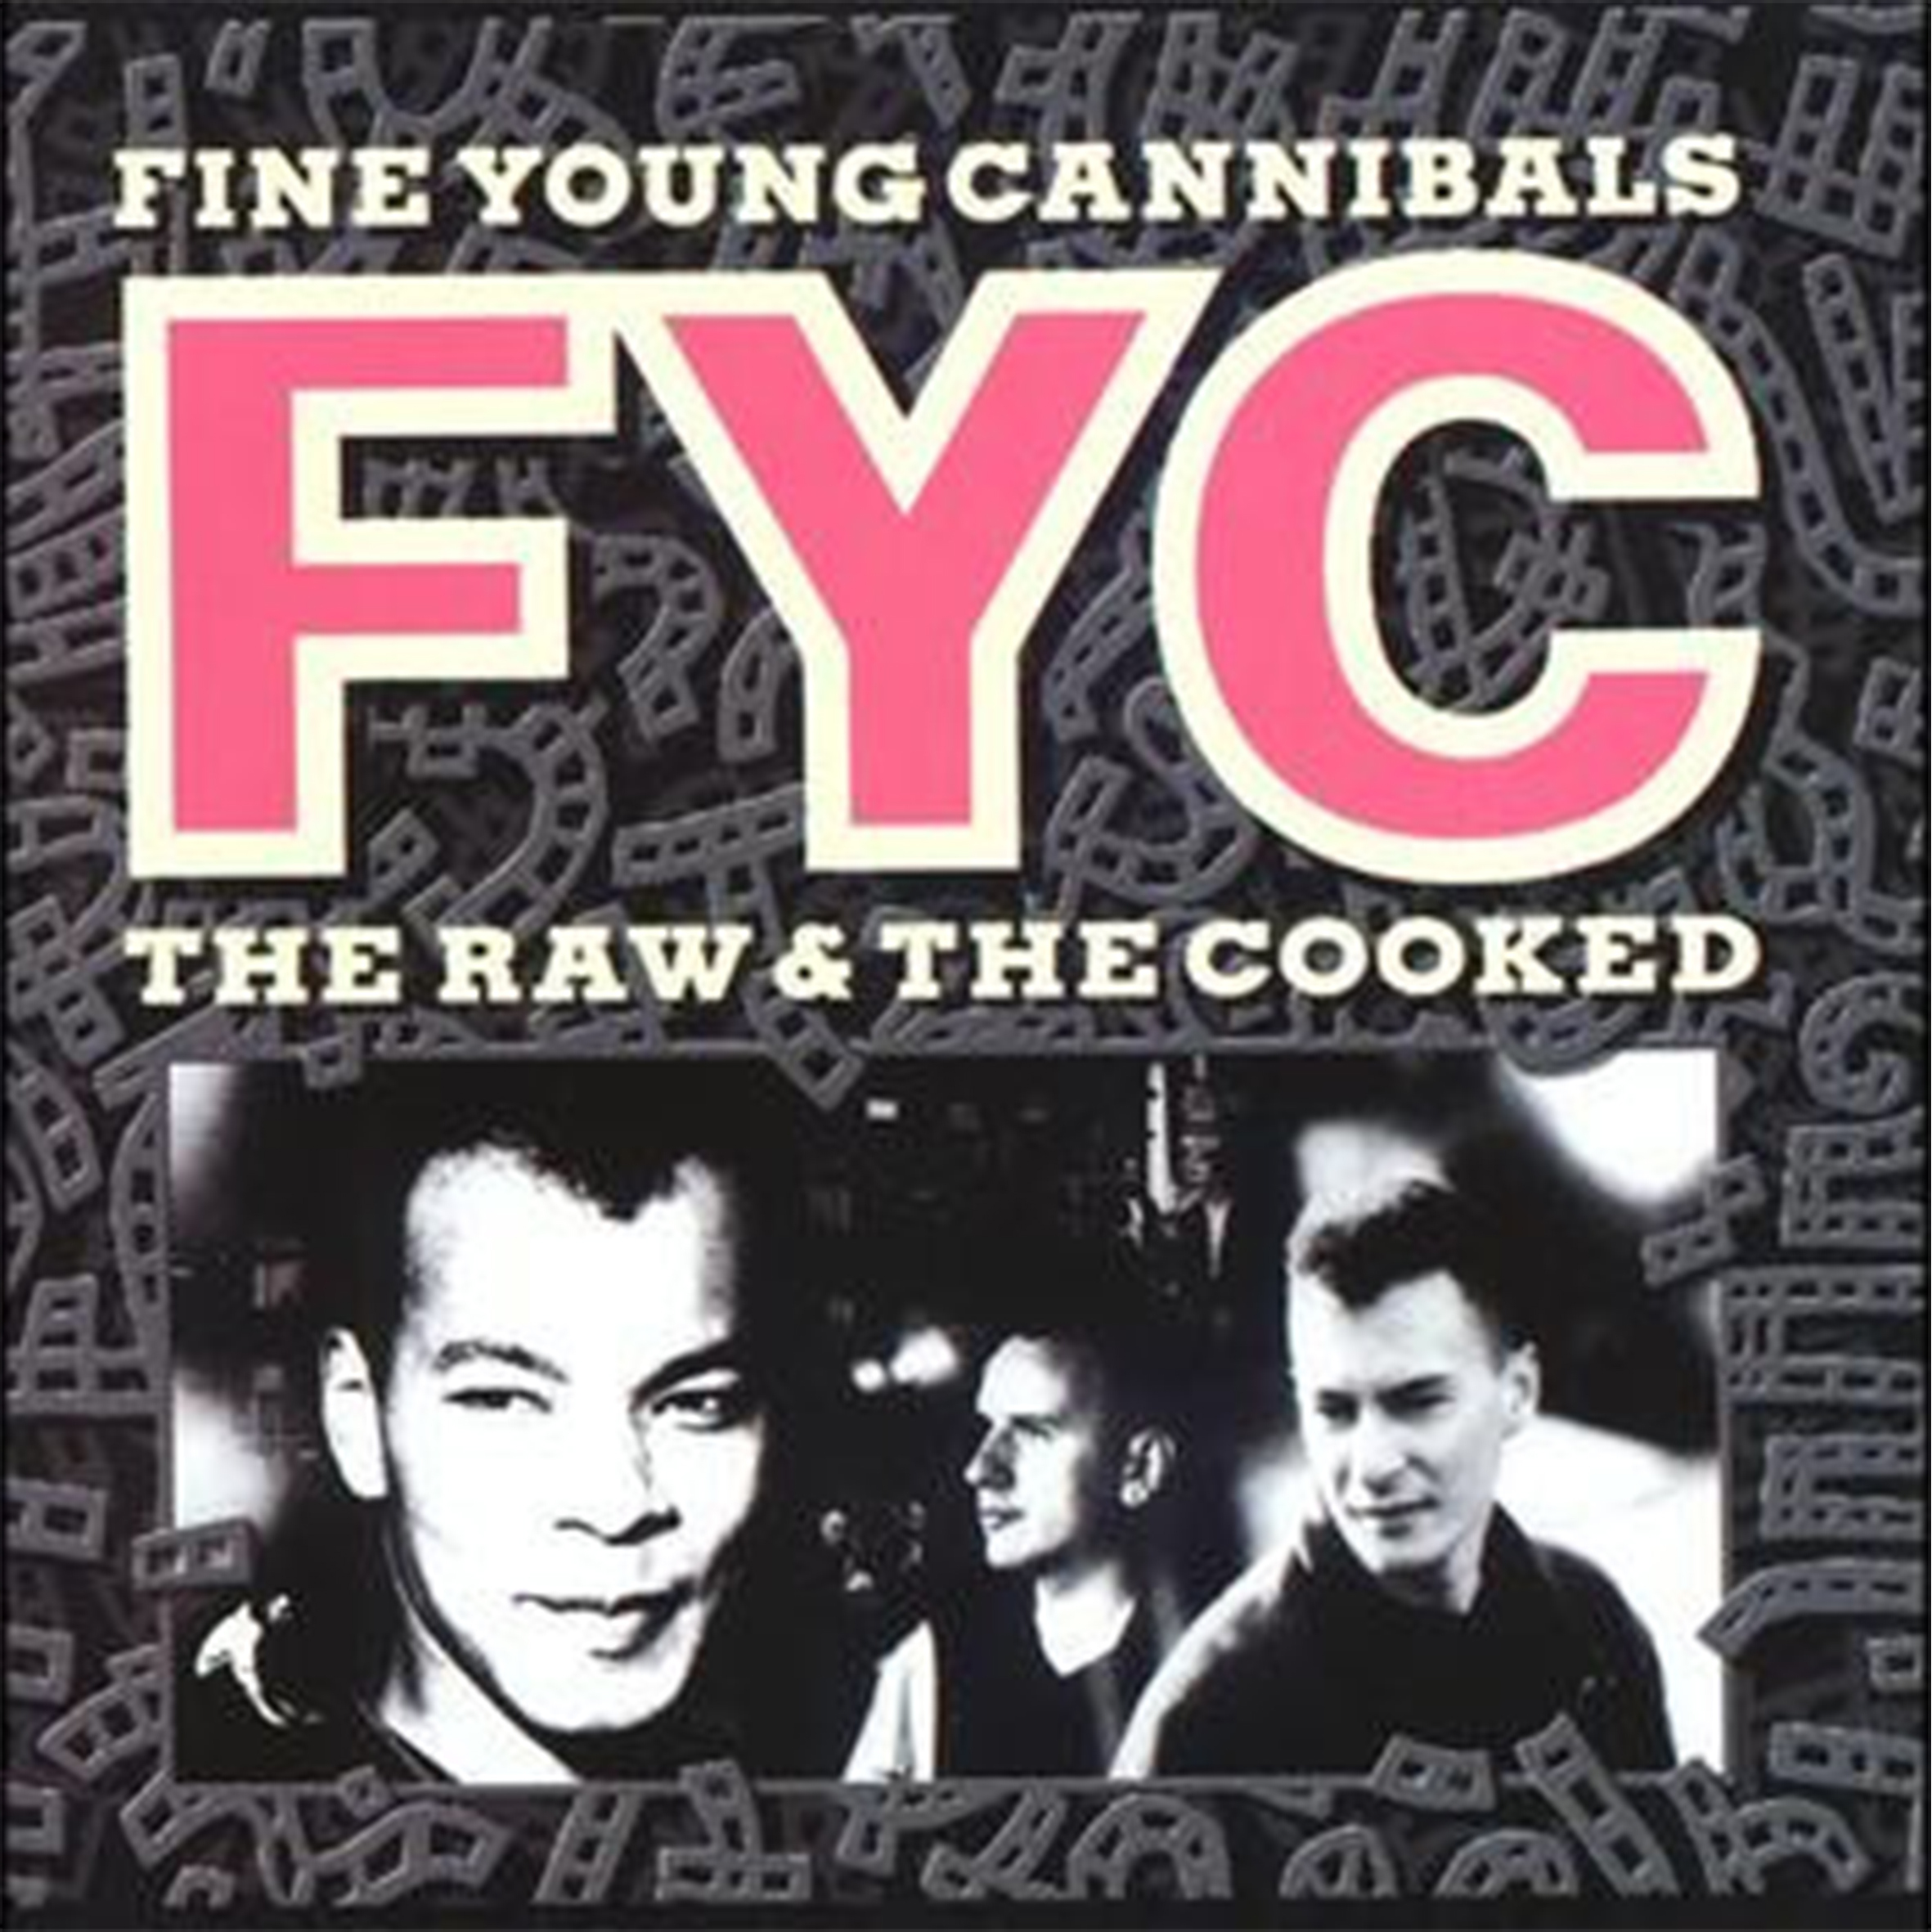 Vinil - Fine Young Cannibals - The Raw & The Cooked